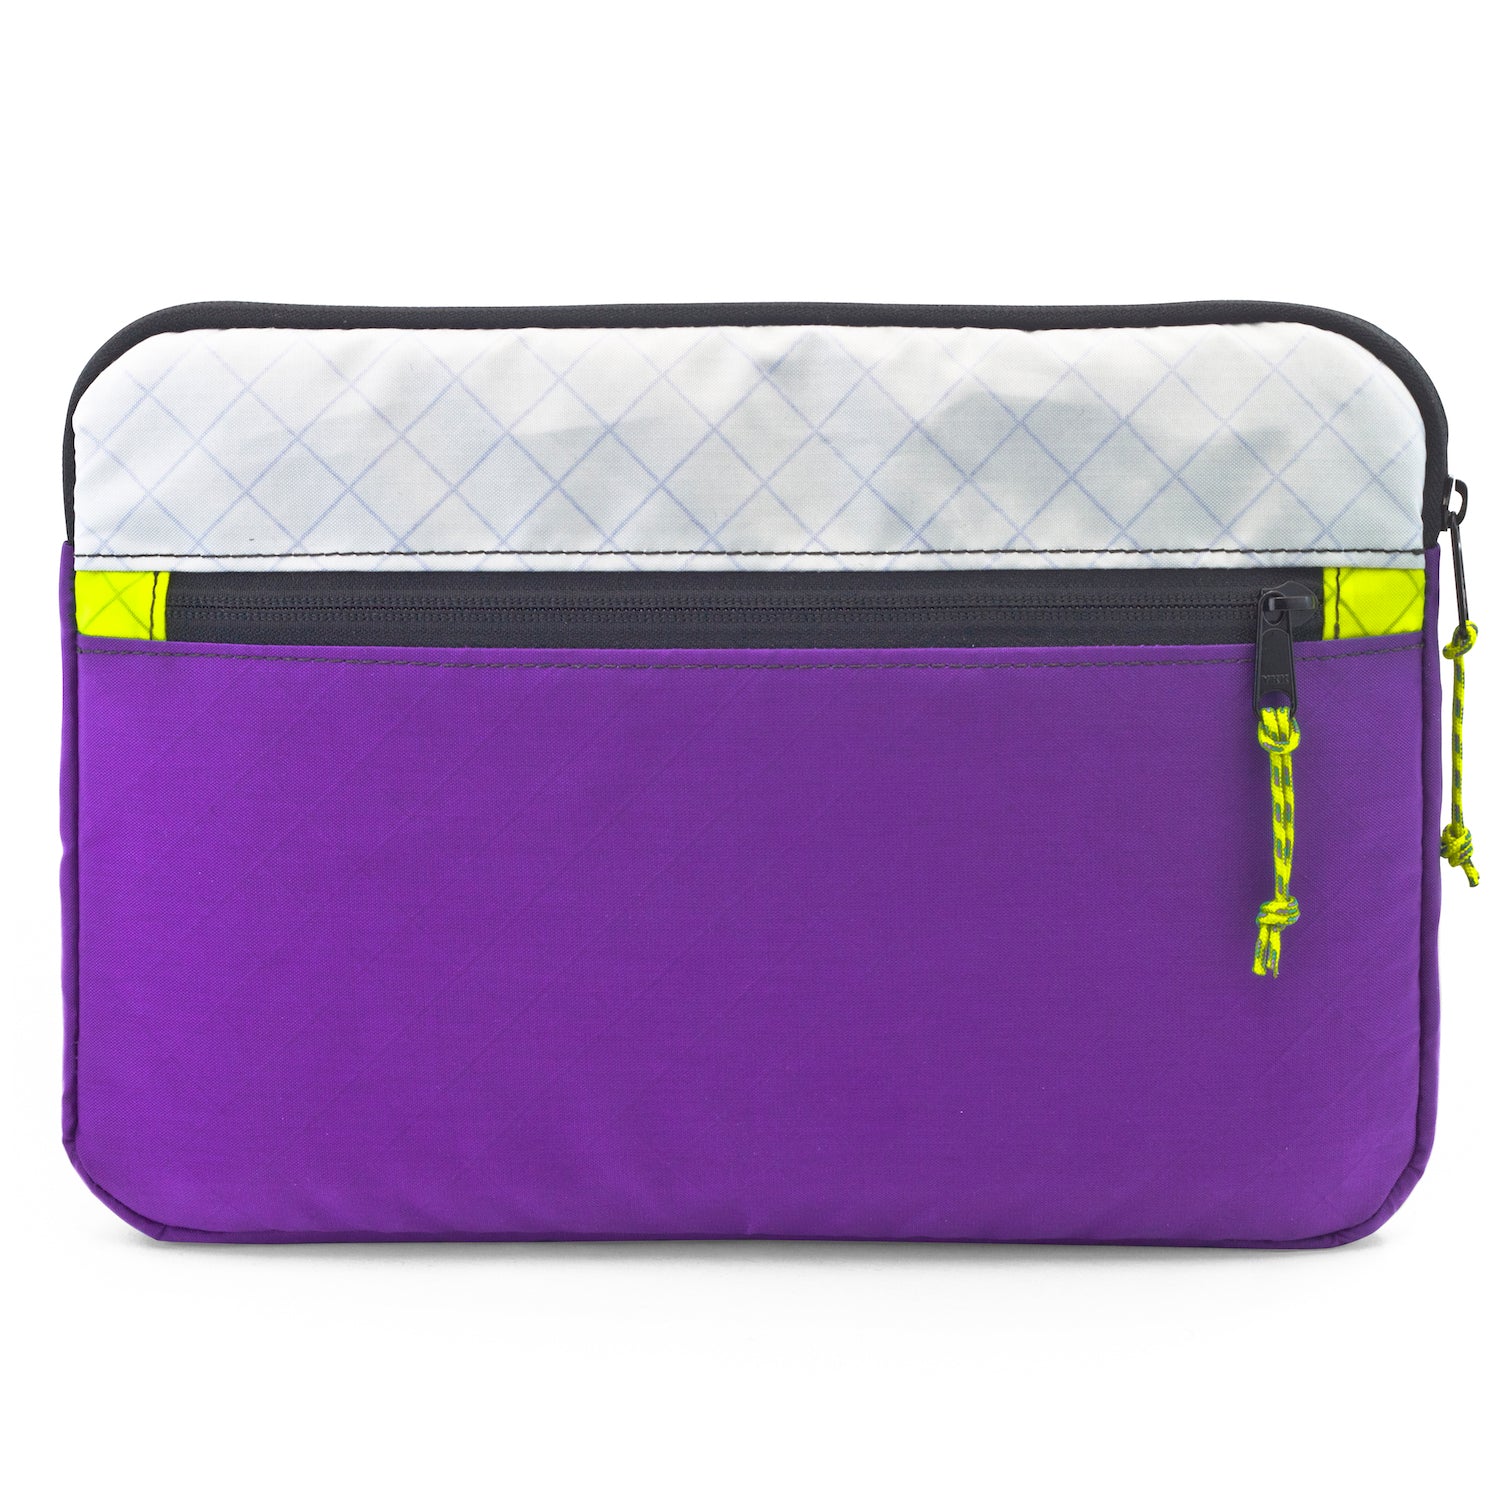 Flowfold Ally Laptop Case & water repellent recycled laptop sleeve made in USA Purple, grey and neon accents 